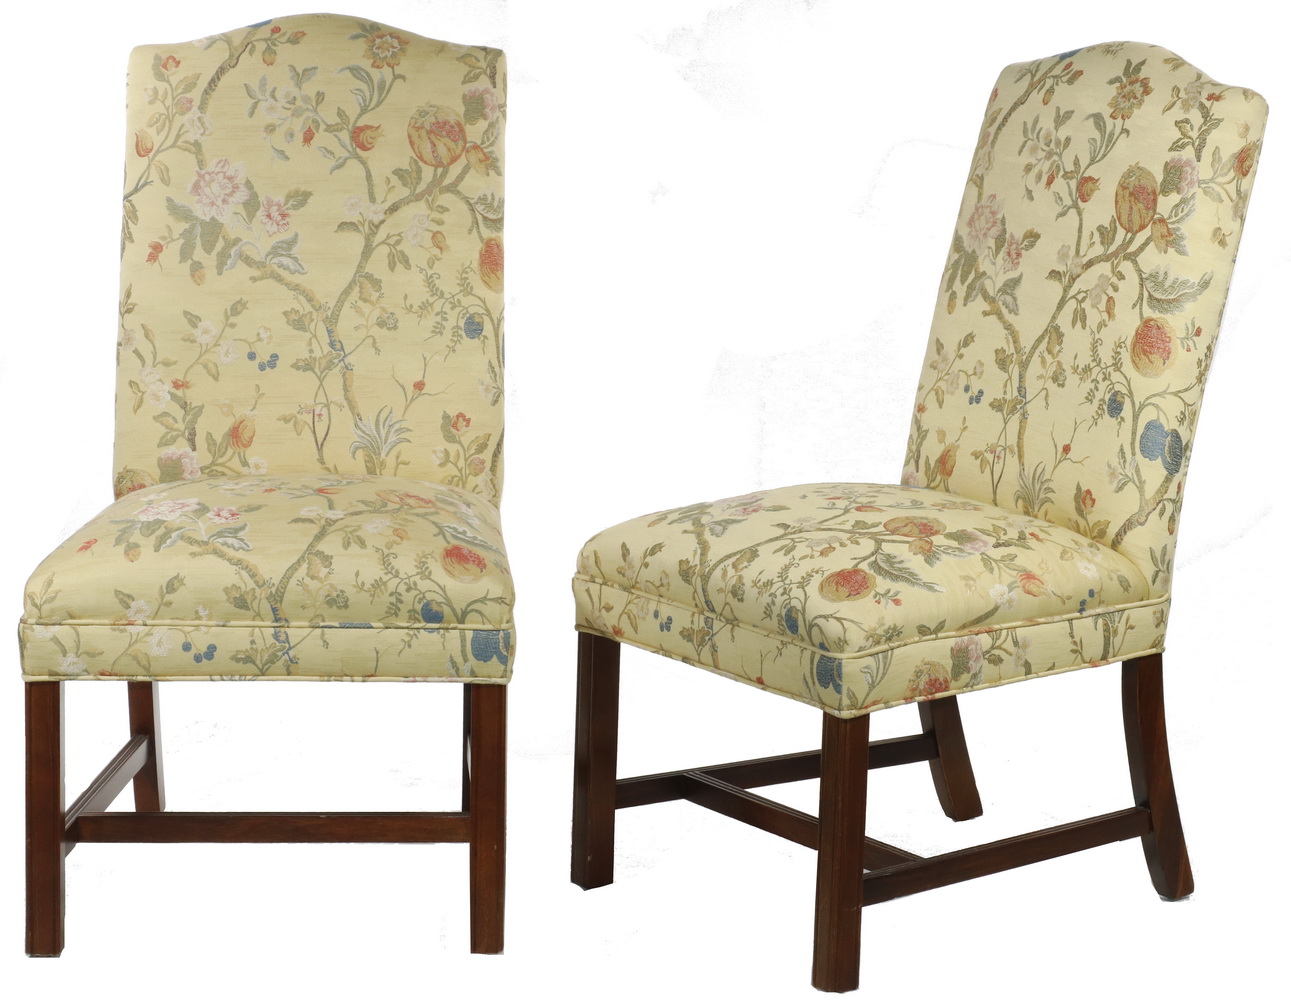 PR OF TALL BACKED SIDE CHAIRS Fully 2b515d